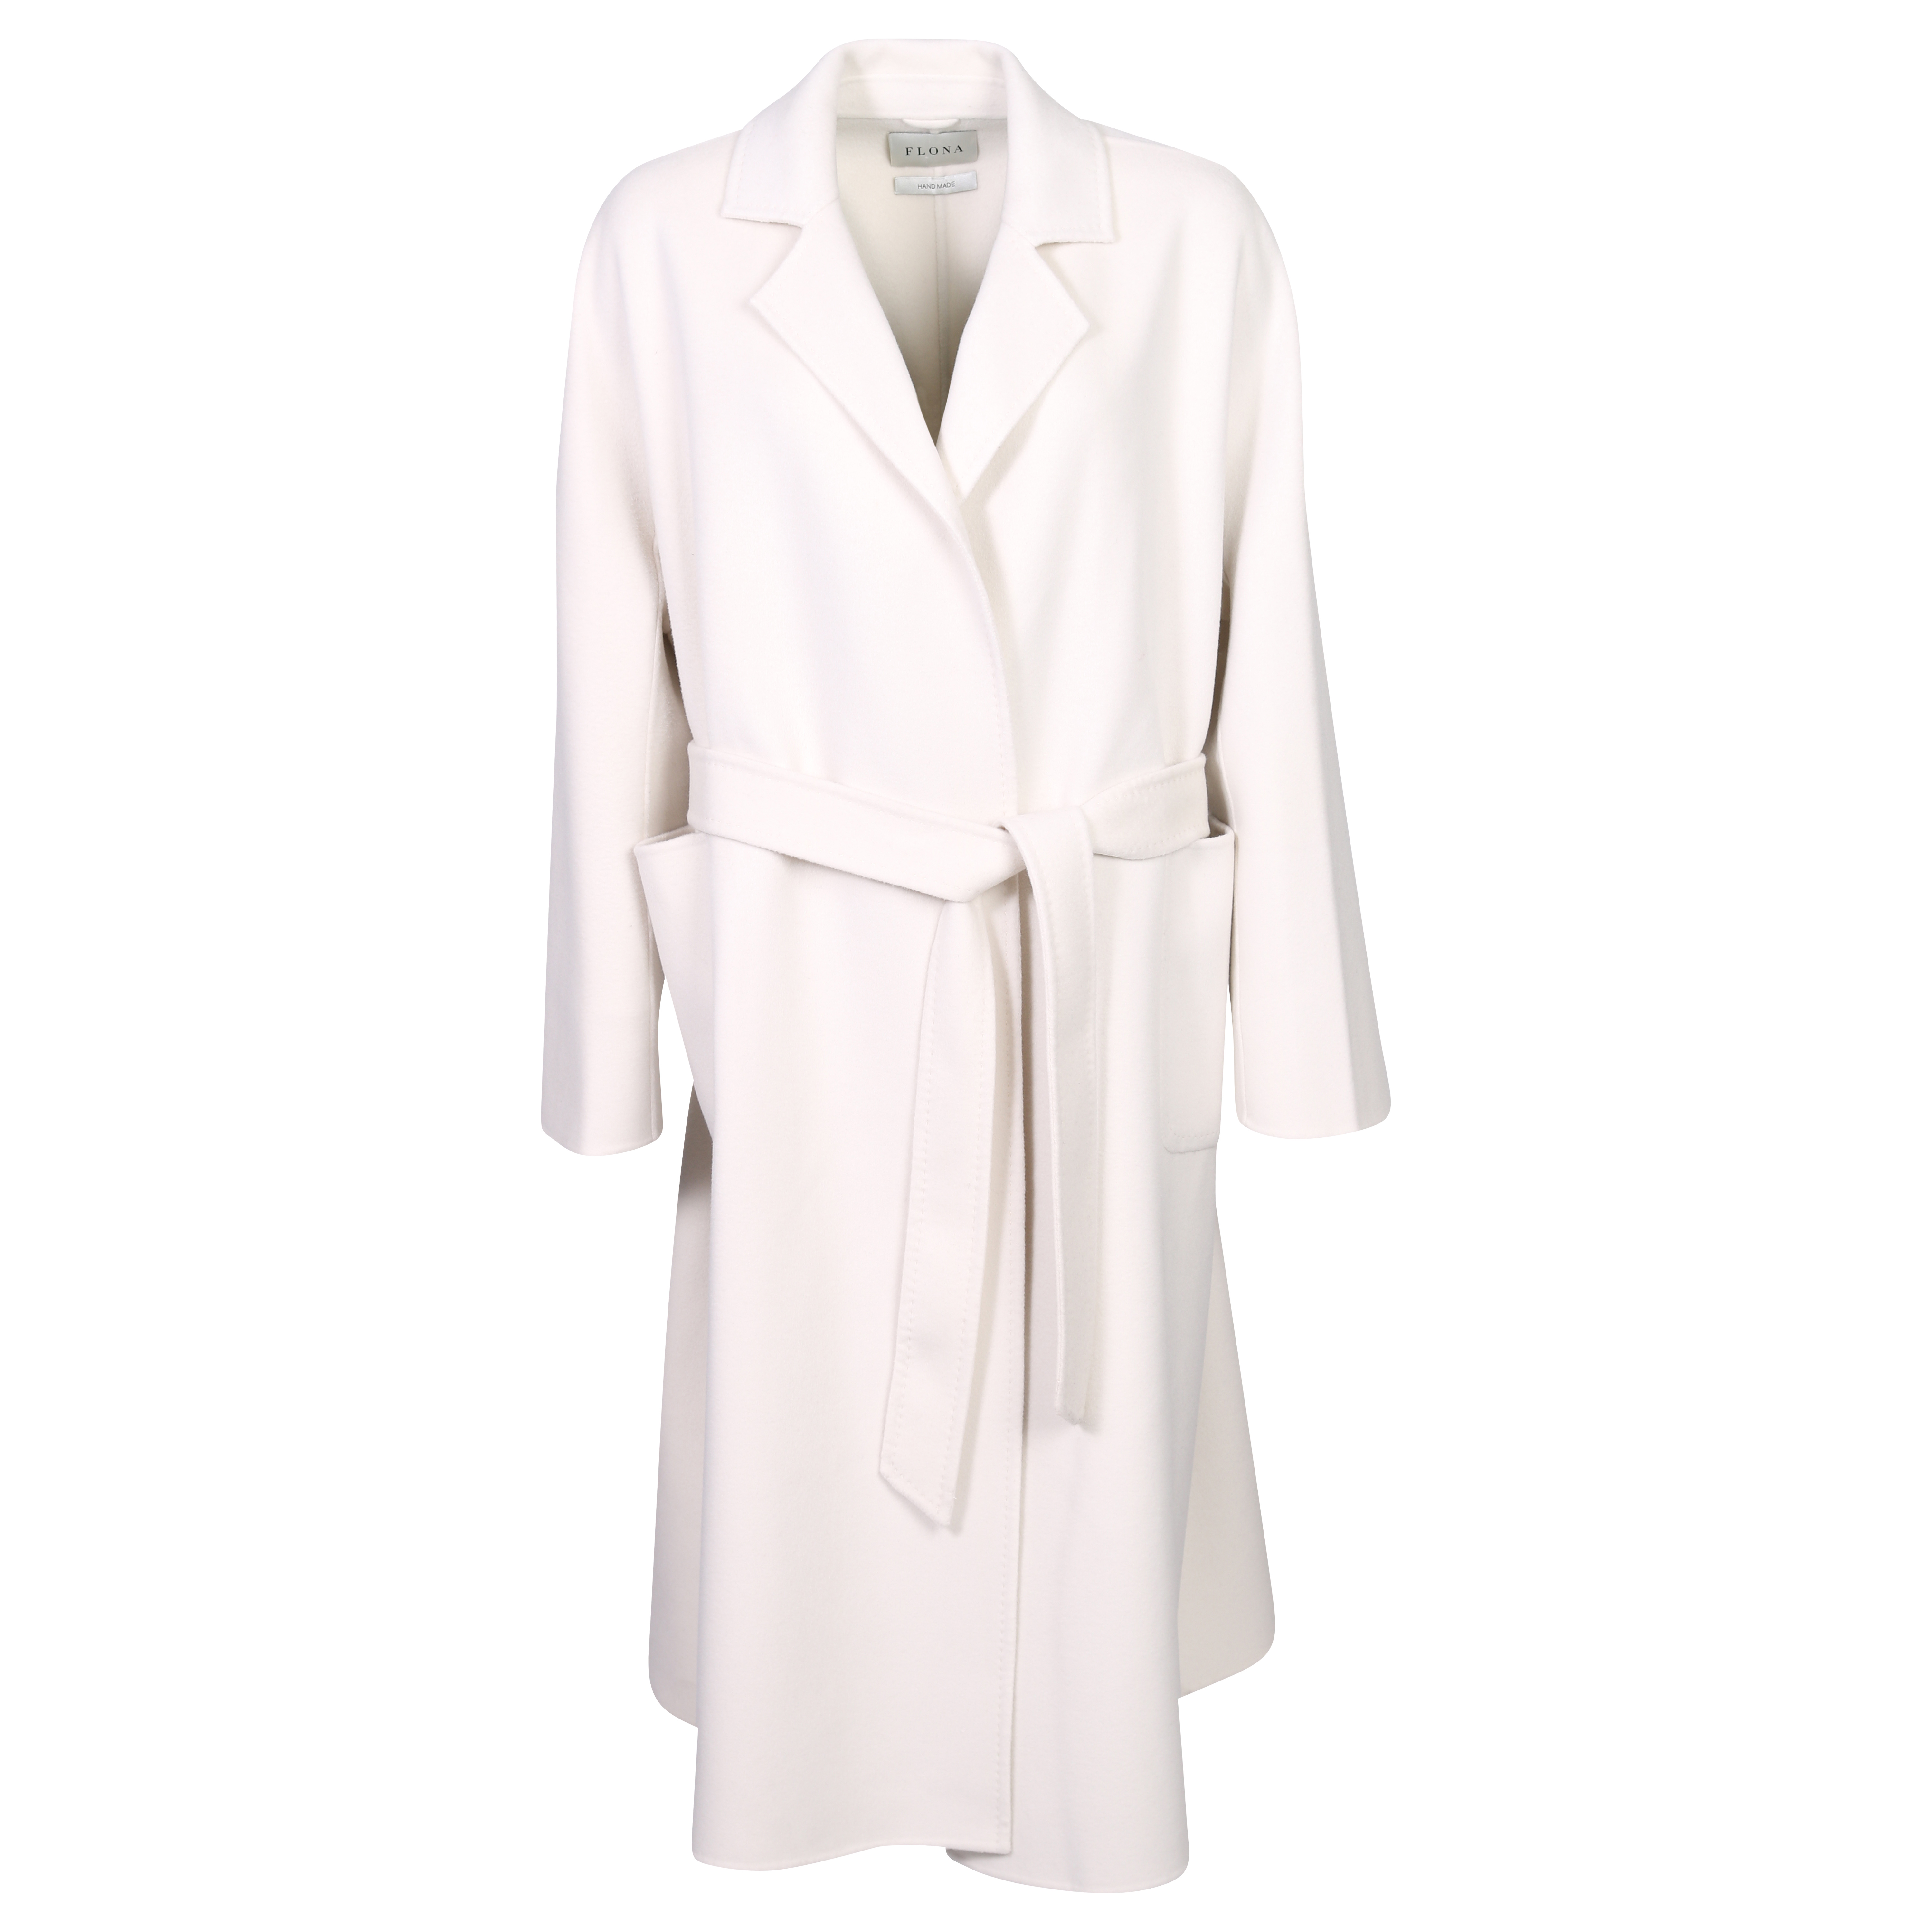 Flona Wool/Cashmere Coat in Offwhite